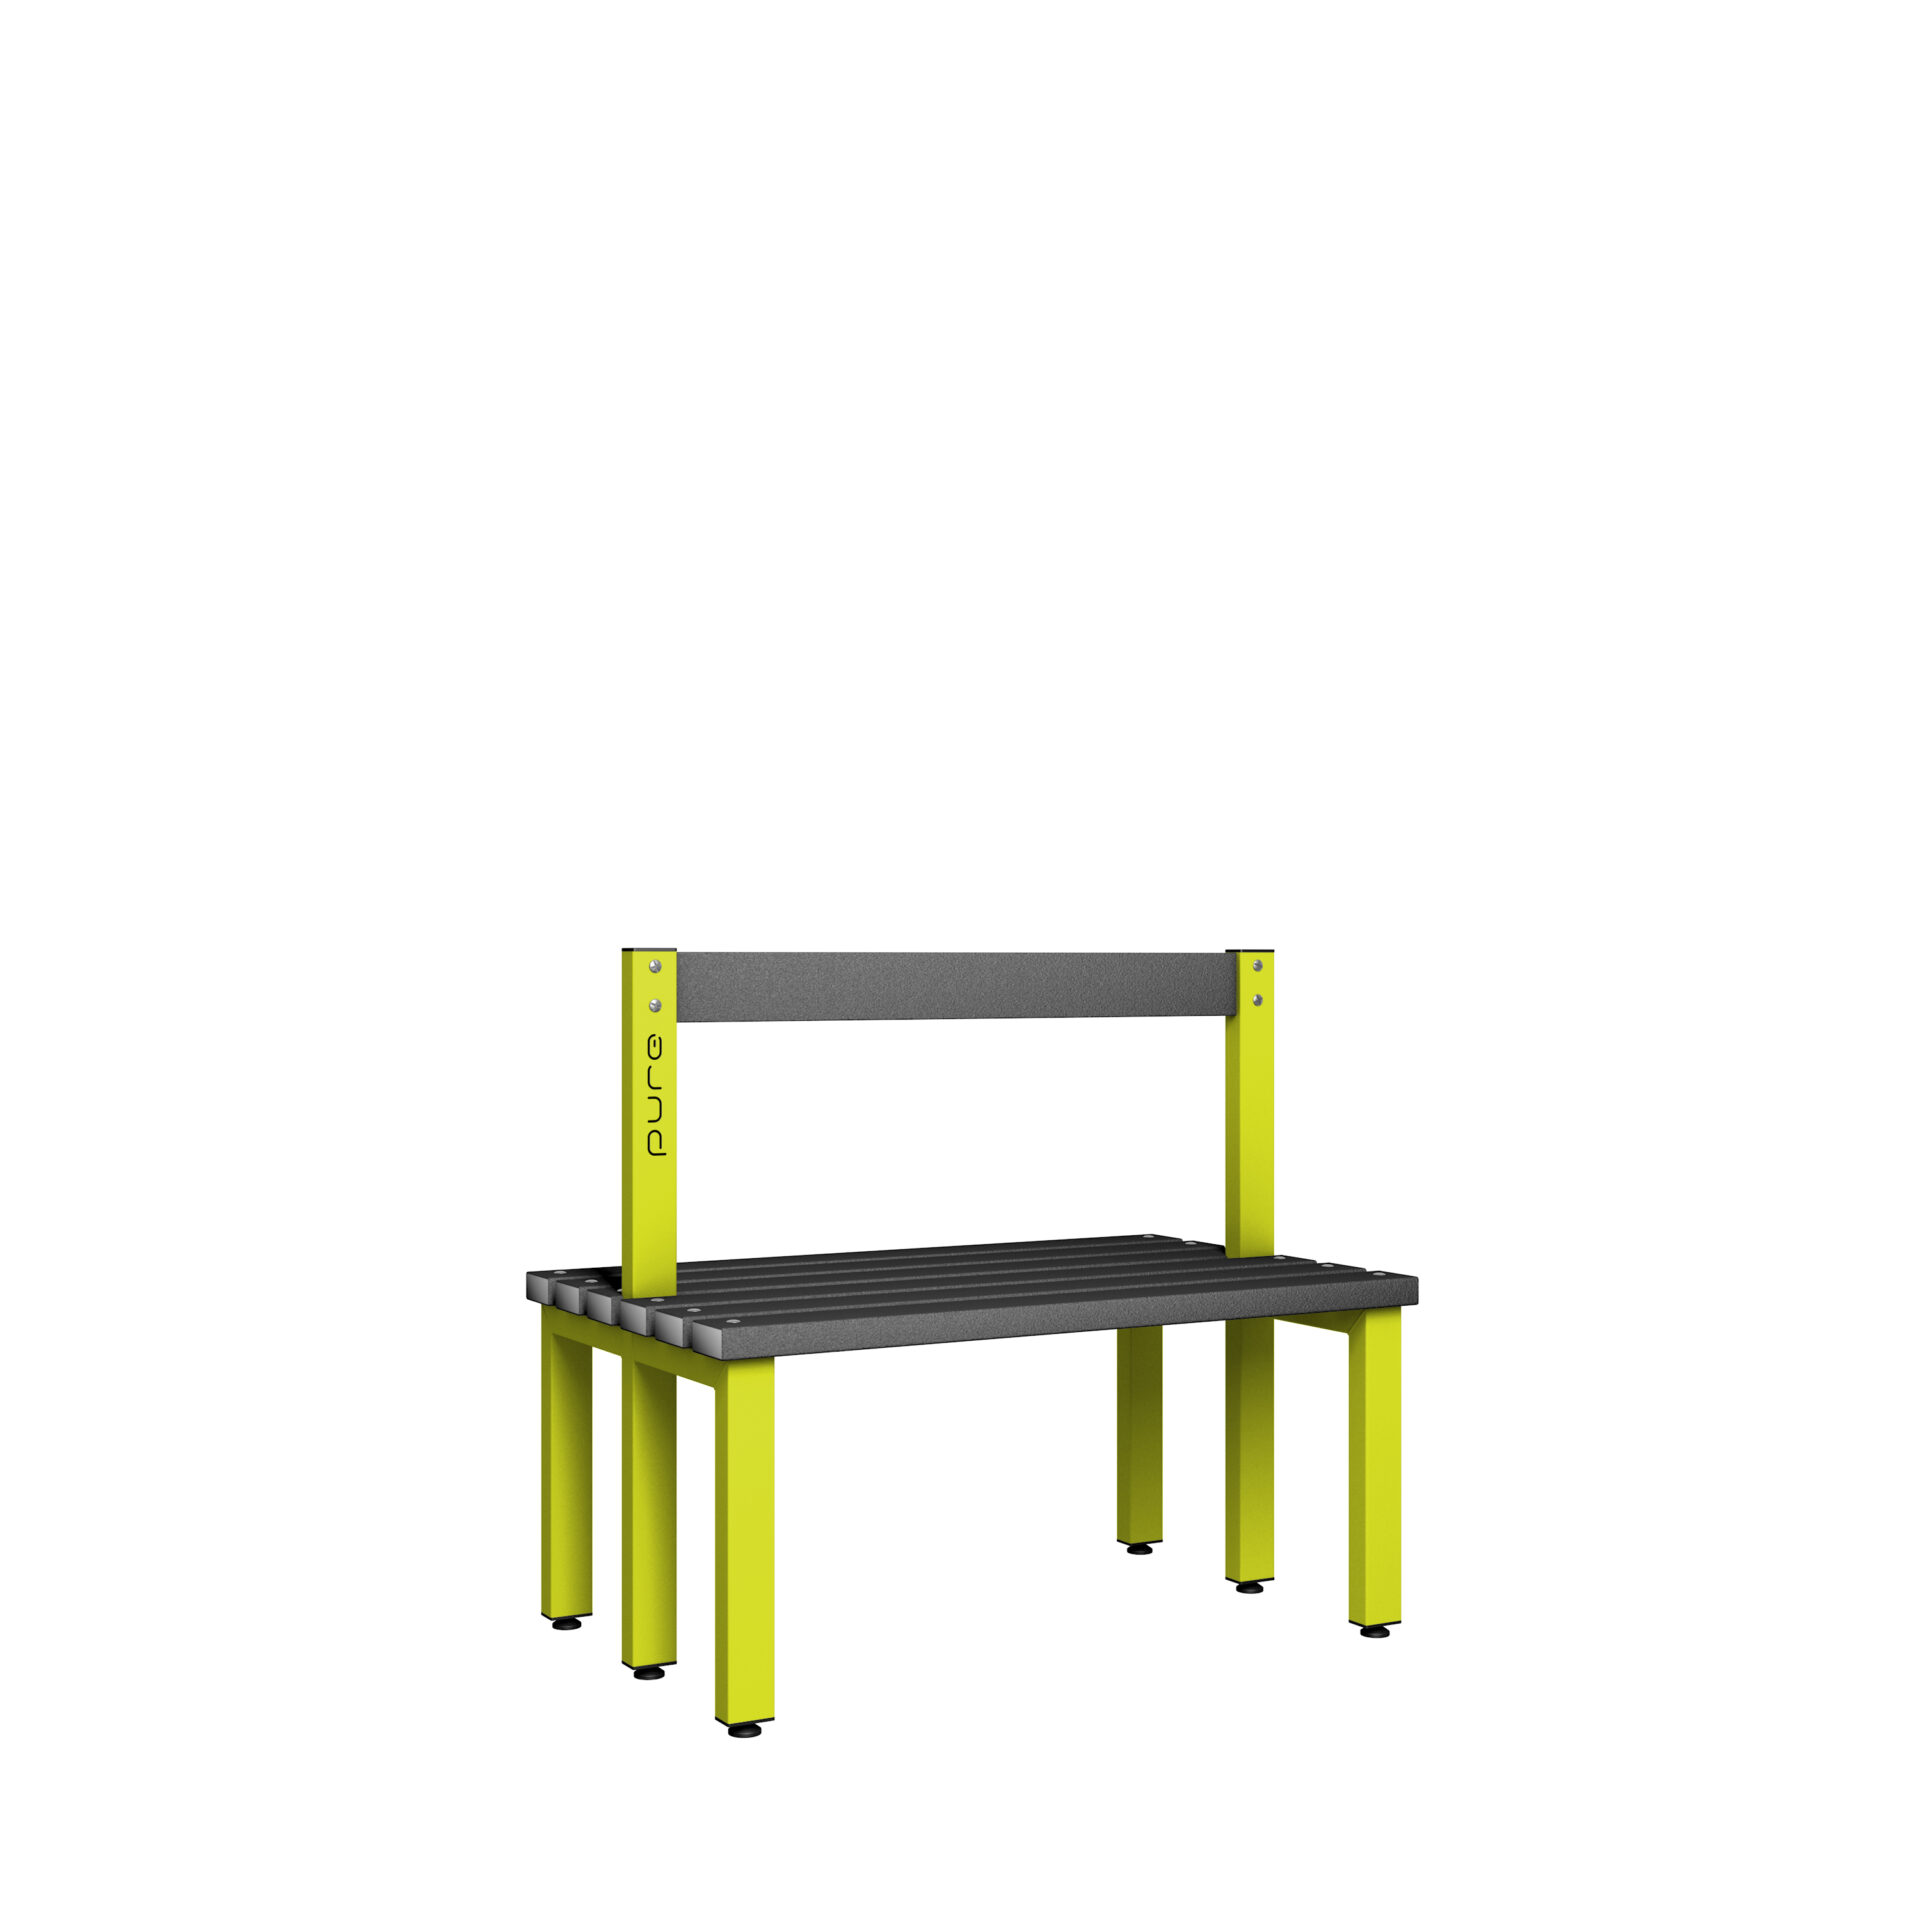 Pure Carbon Zero Double Sided 1000mm Low Height Back Rest Bench